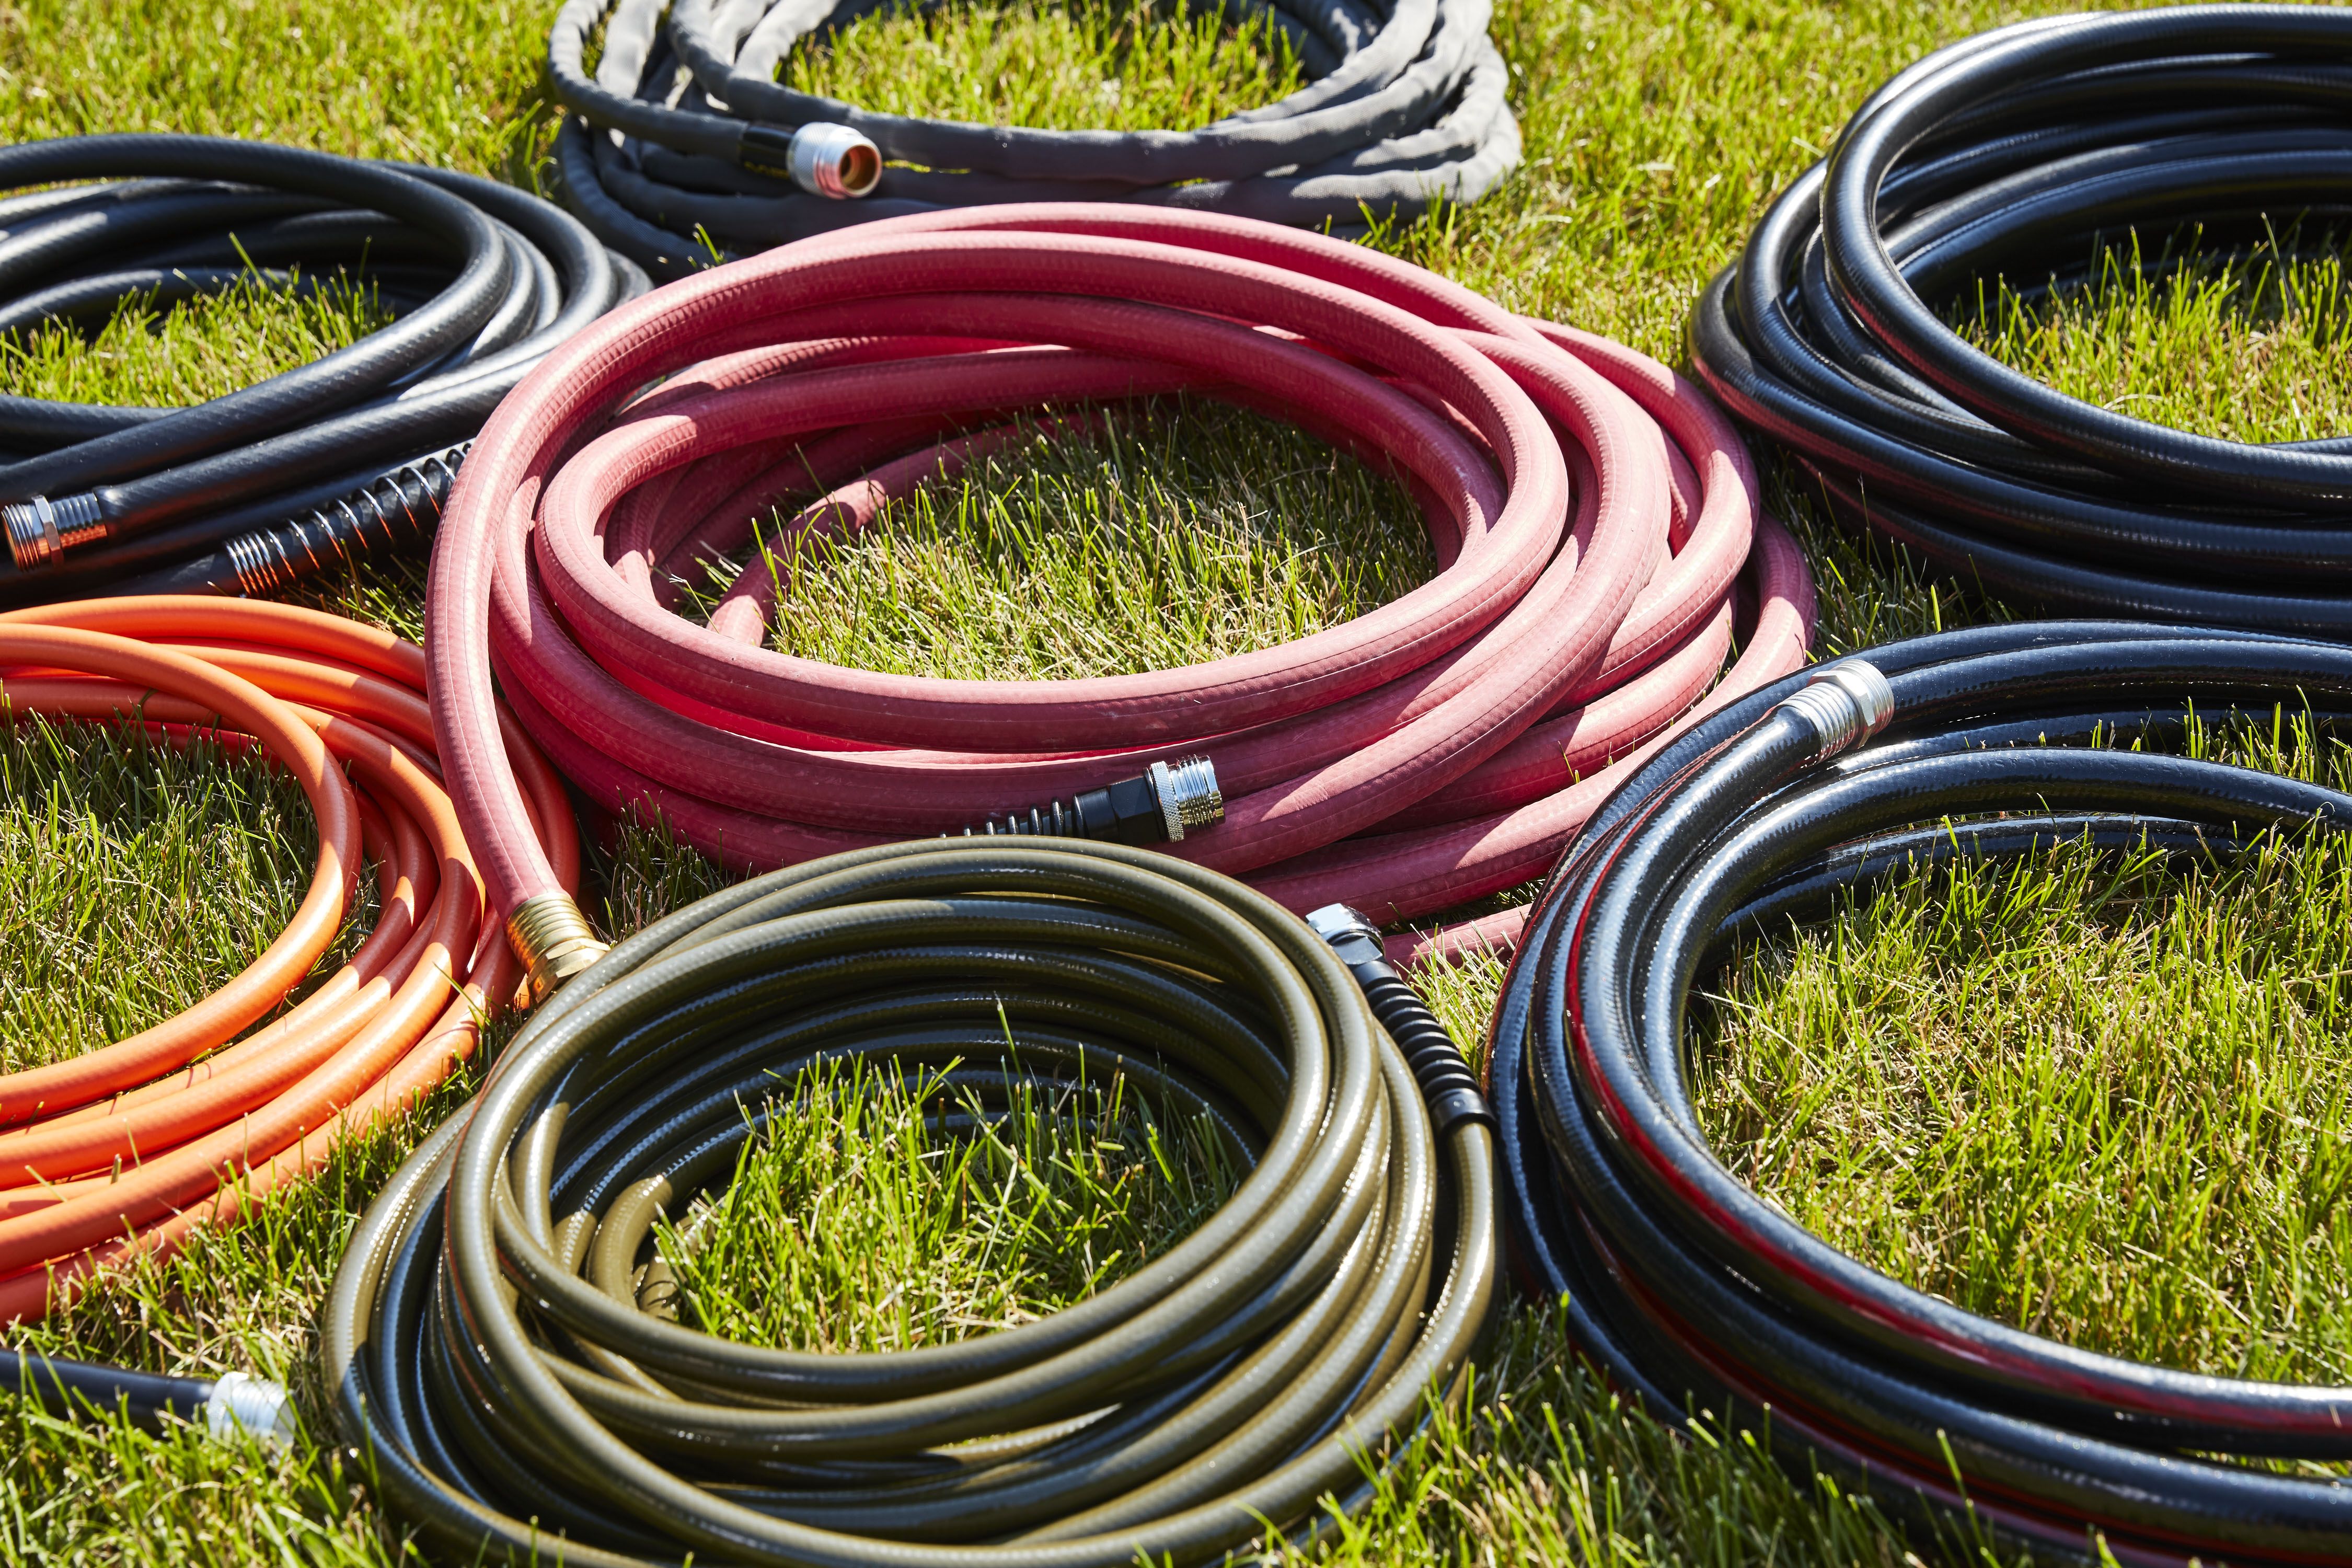 Garden Hose tips  Use hose menders to connect hoses in different